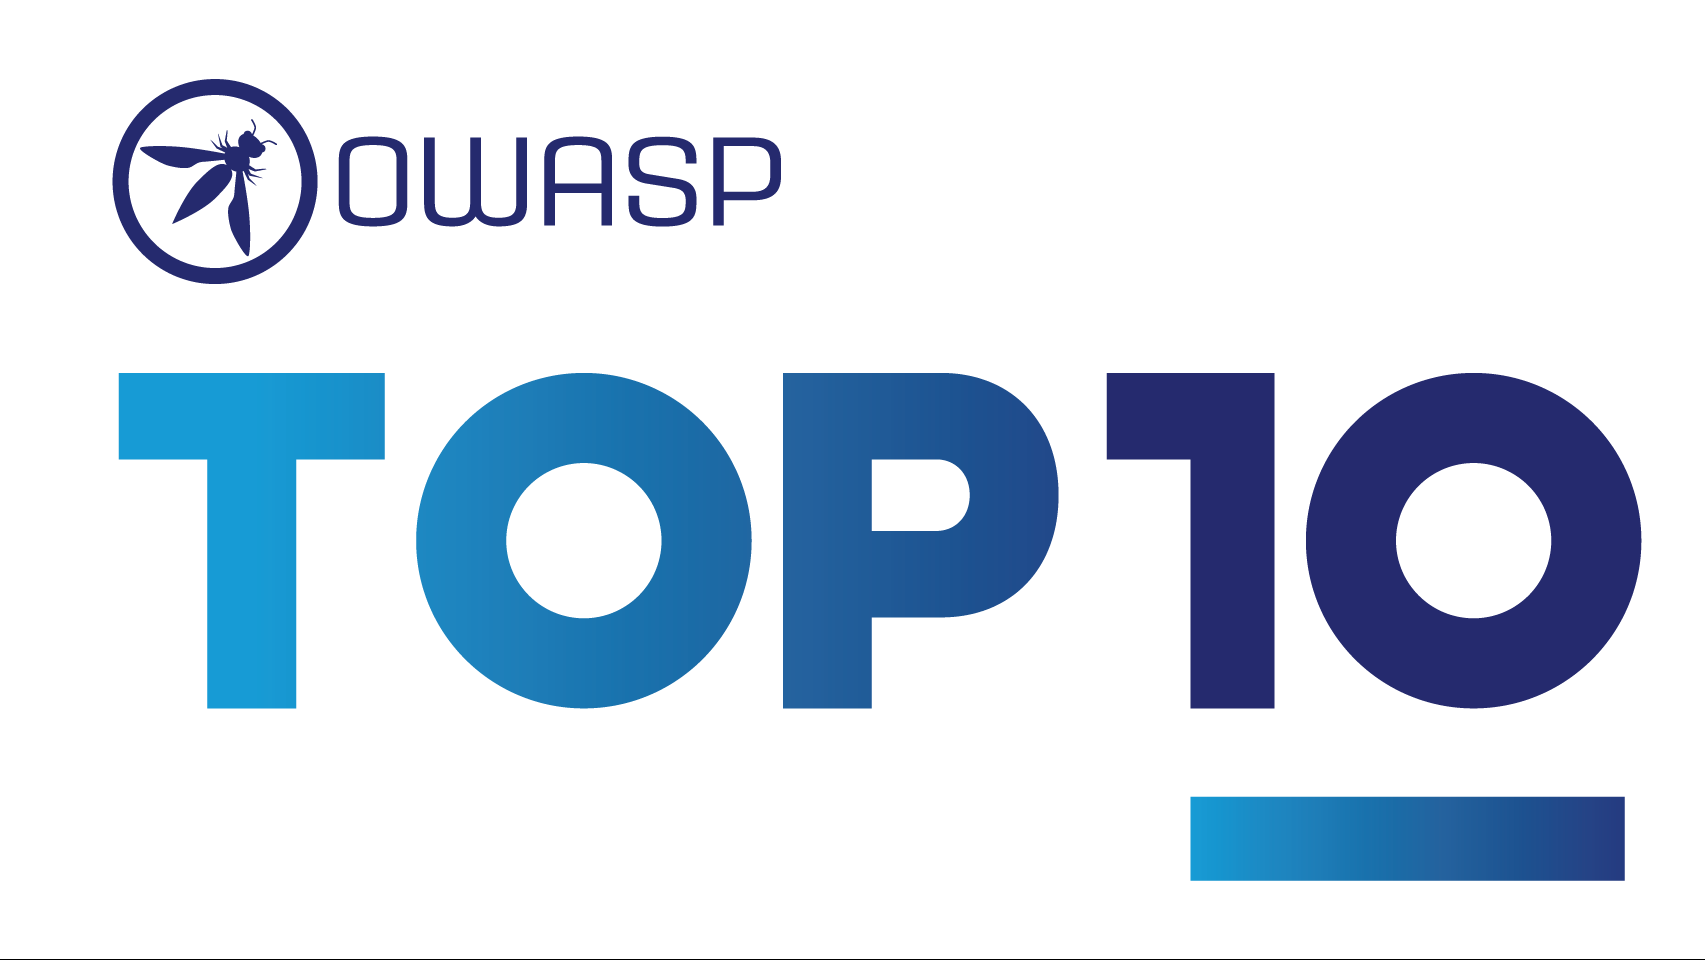 OWASP Top 10: The 10 Most Critical Web Application Security Risks